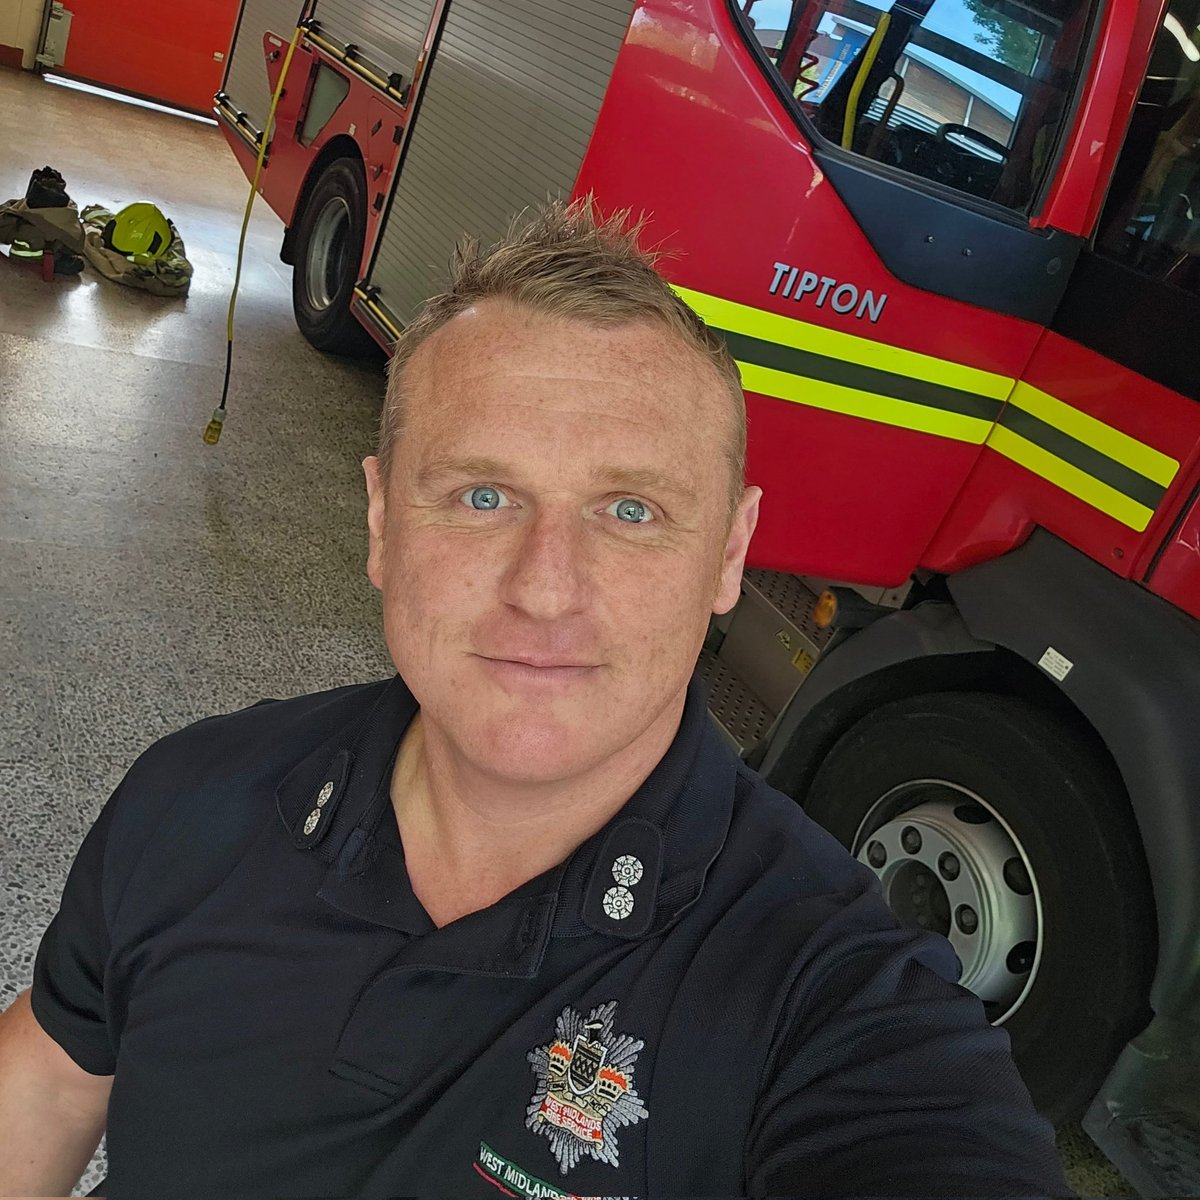 22yrs ago today I walked through the doors of @WestMidsFire's BTC. 
The changes within the job have been massive but 1 thing remains the same, it's the best job with some of the greatest people and friends I could have wished for. 
#Firefighter #FireService #BestJob